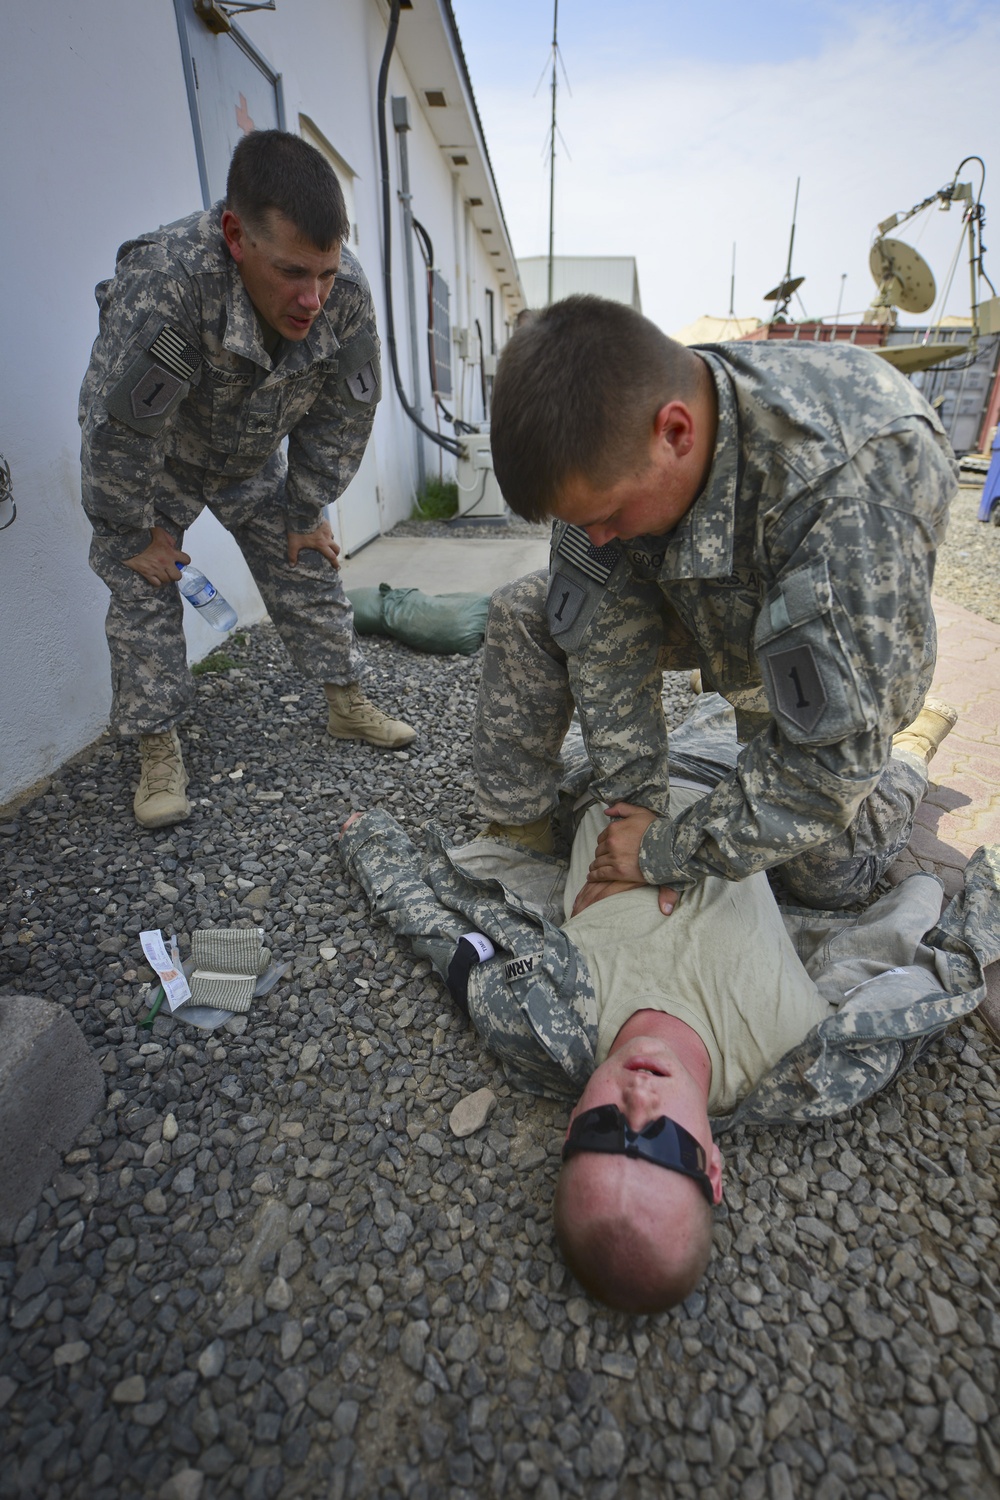 US Army medics offer CLS certification to service members